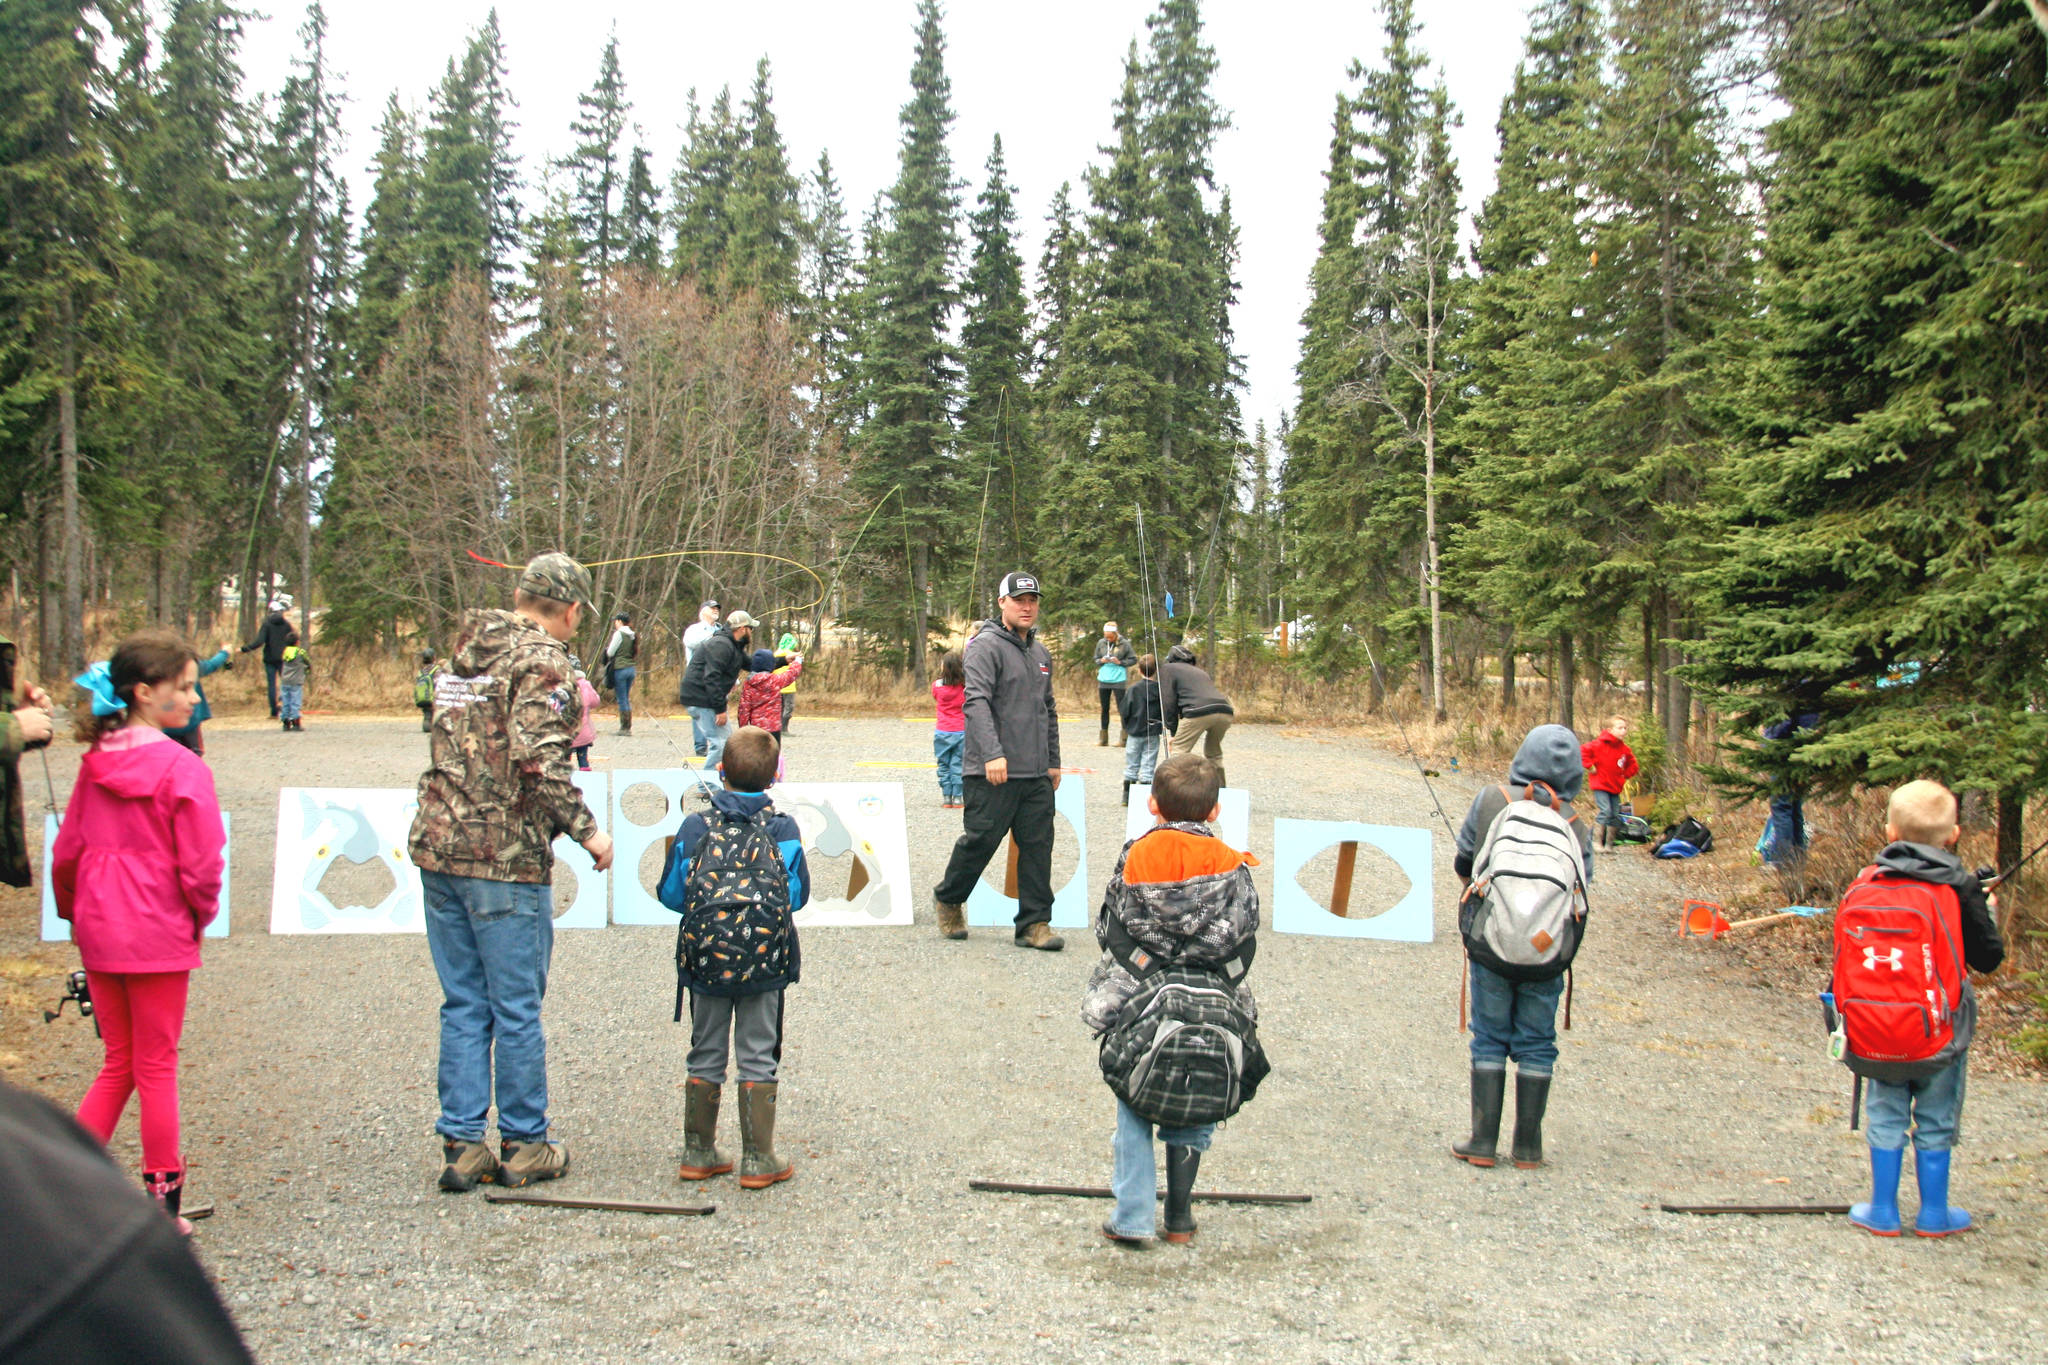 Kids try their hand at spin casting during the 18th Annual Kenai Peninsula Salmon Celebration at Johnson Lake State Recreation Site in Kasilof. The event featured hands-on activity and demonstration booths focused around wildlife education and safety. (Photo by Erin Thompson/Peninsula Clarion)